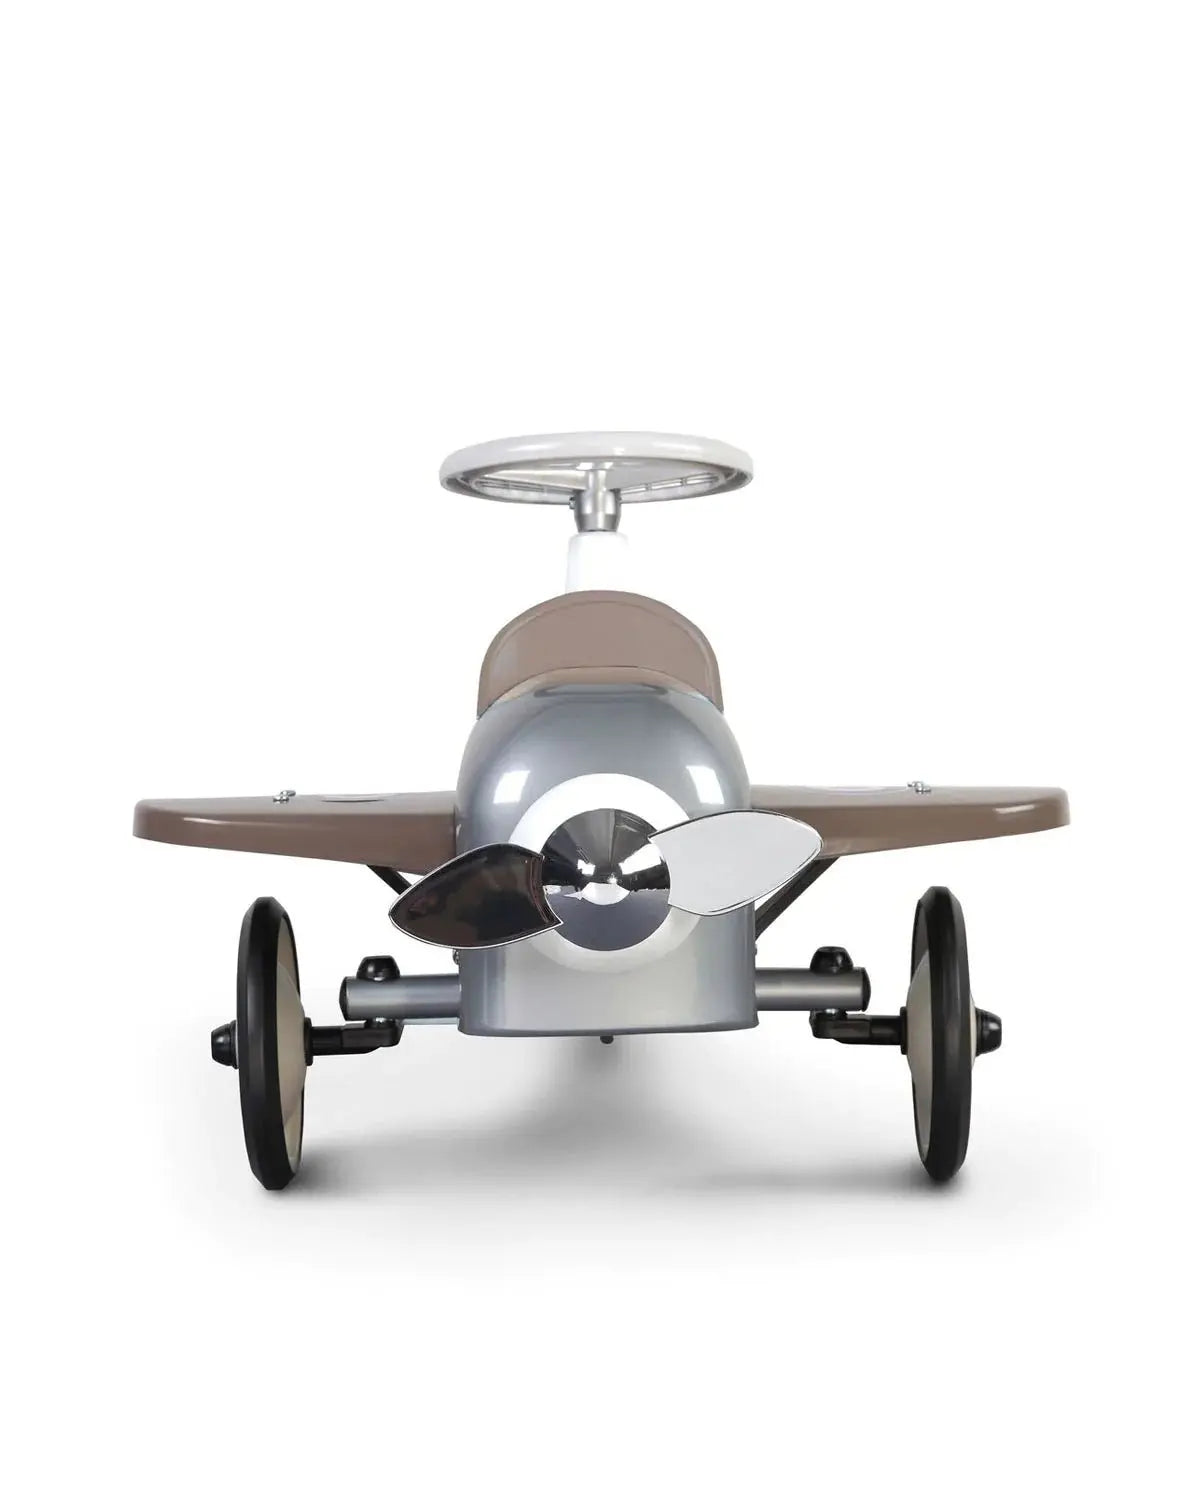 Durable Ride-on Speedster Plane, Airplane Graphic Car, Kids Vehicle Toy, Perfect Gift for Toddlers  Baghera   